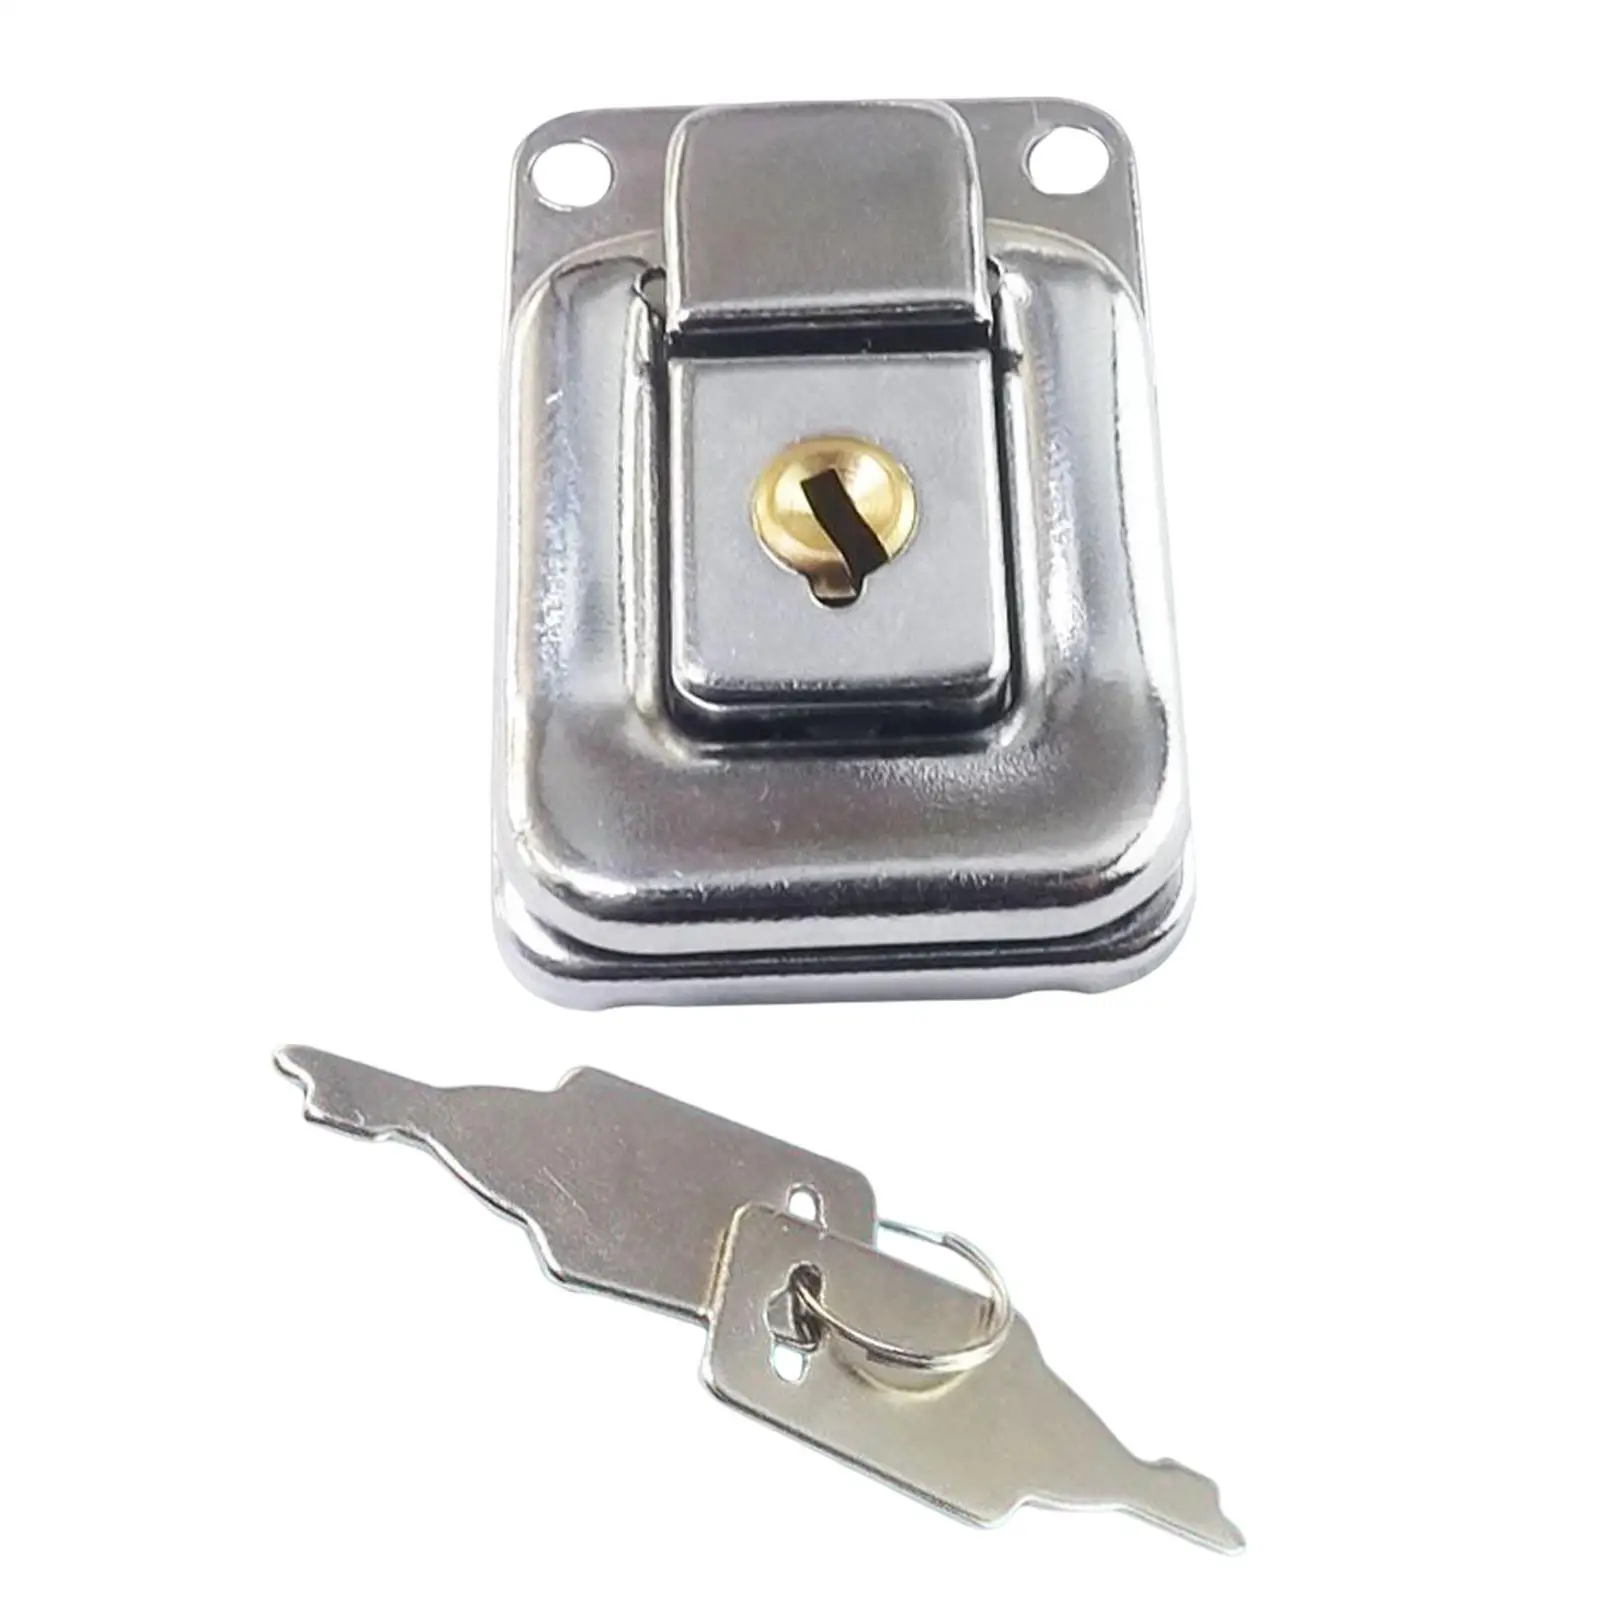 Metal Clasp Lock Toggle Latch with Keys for Drawbolt Closure Box Chest